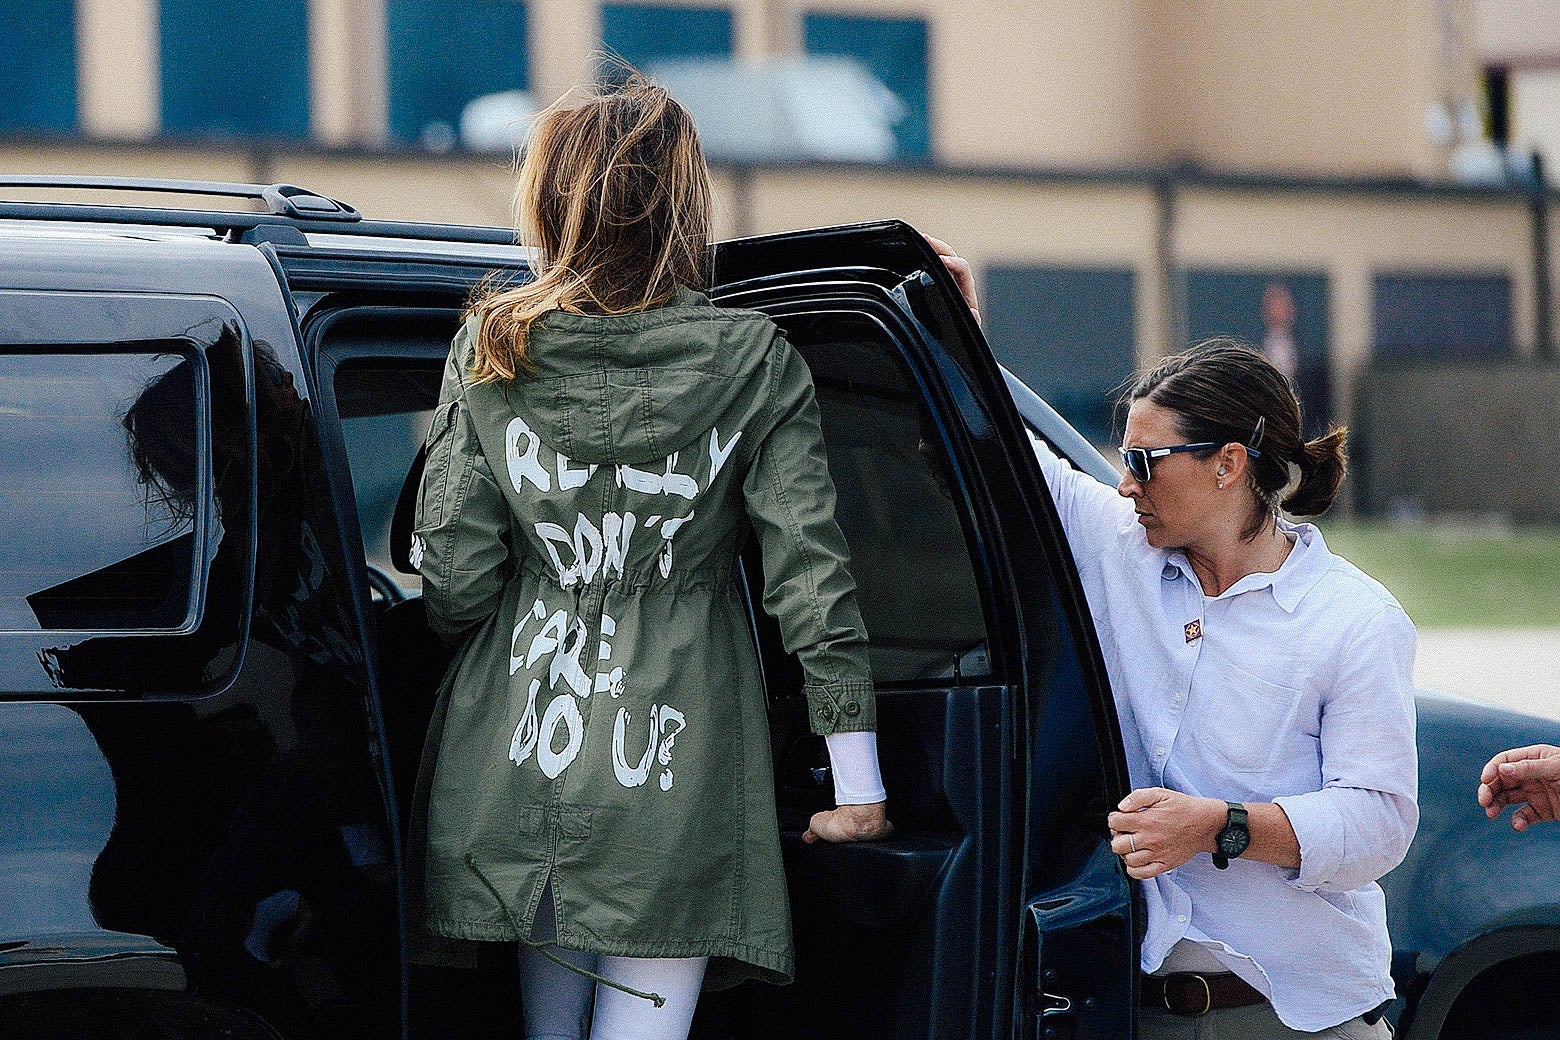 First lady Melania Trump departs Joint Base Andrews in Maryland on Thursday while wearing a jacket with the words "I really don’t care, do you?" Her back is to the camera as she enters a vehicle.